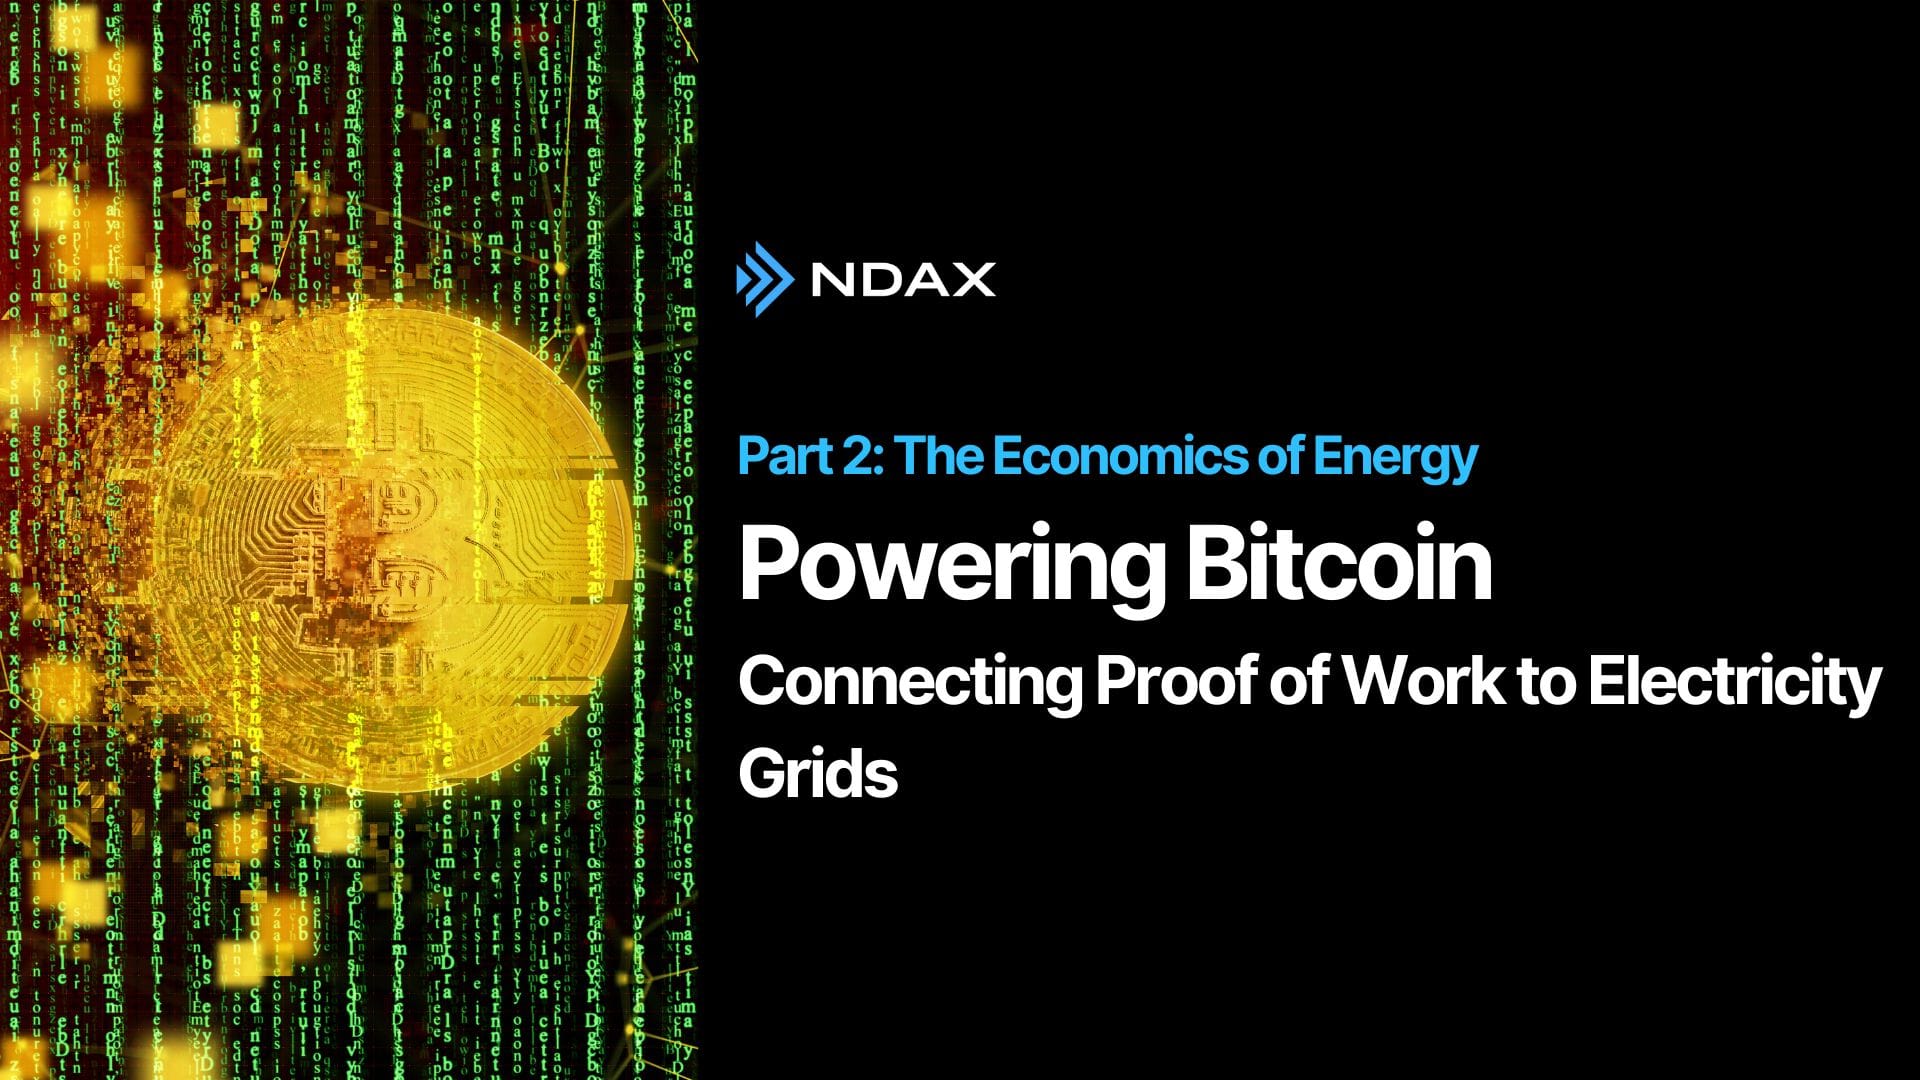 Powering Bitcoin: Connecting Proof of Work to Electricity Grids - Part II